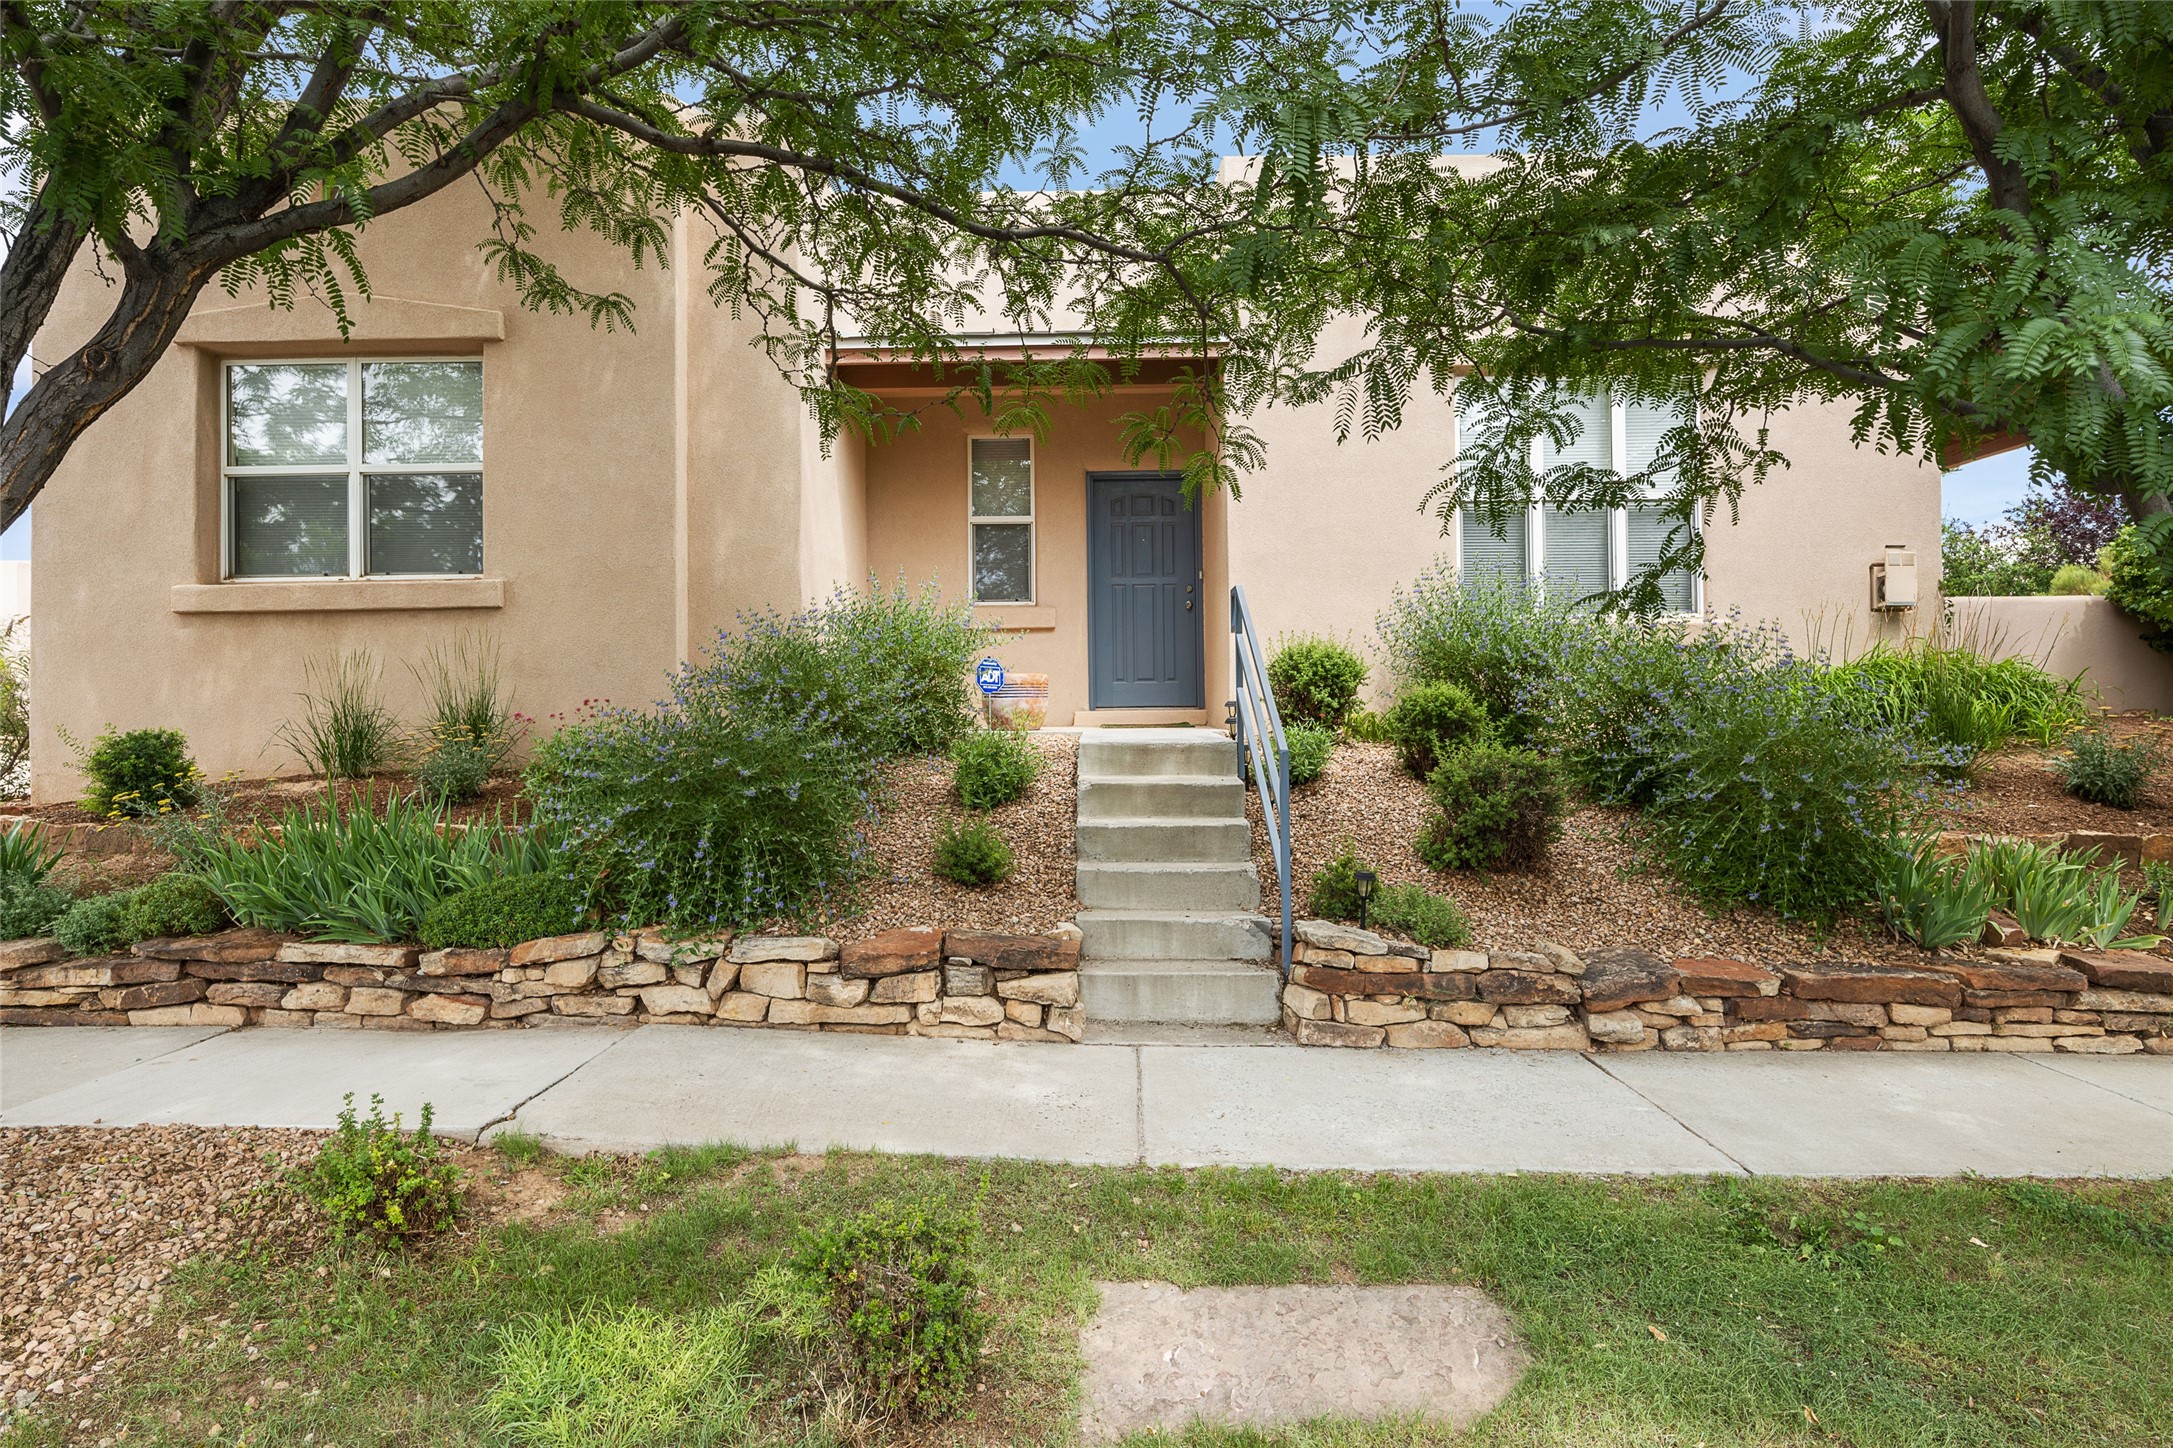 2 Autumn Light Place, Santa Fe, New Mexico 87508, 3 Bedrooms Bedrooms, ,2 BathroomsBathrooms,Residential,For Sale,2 Autumn Light Place,202232122